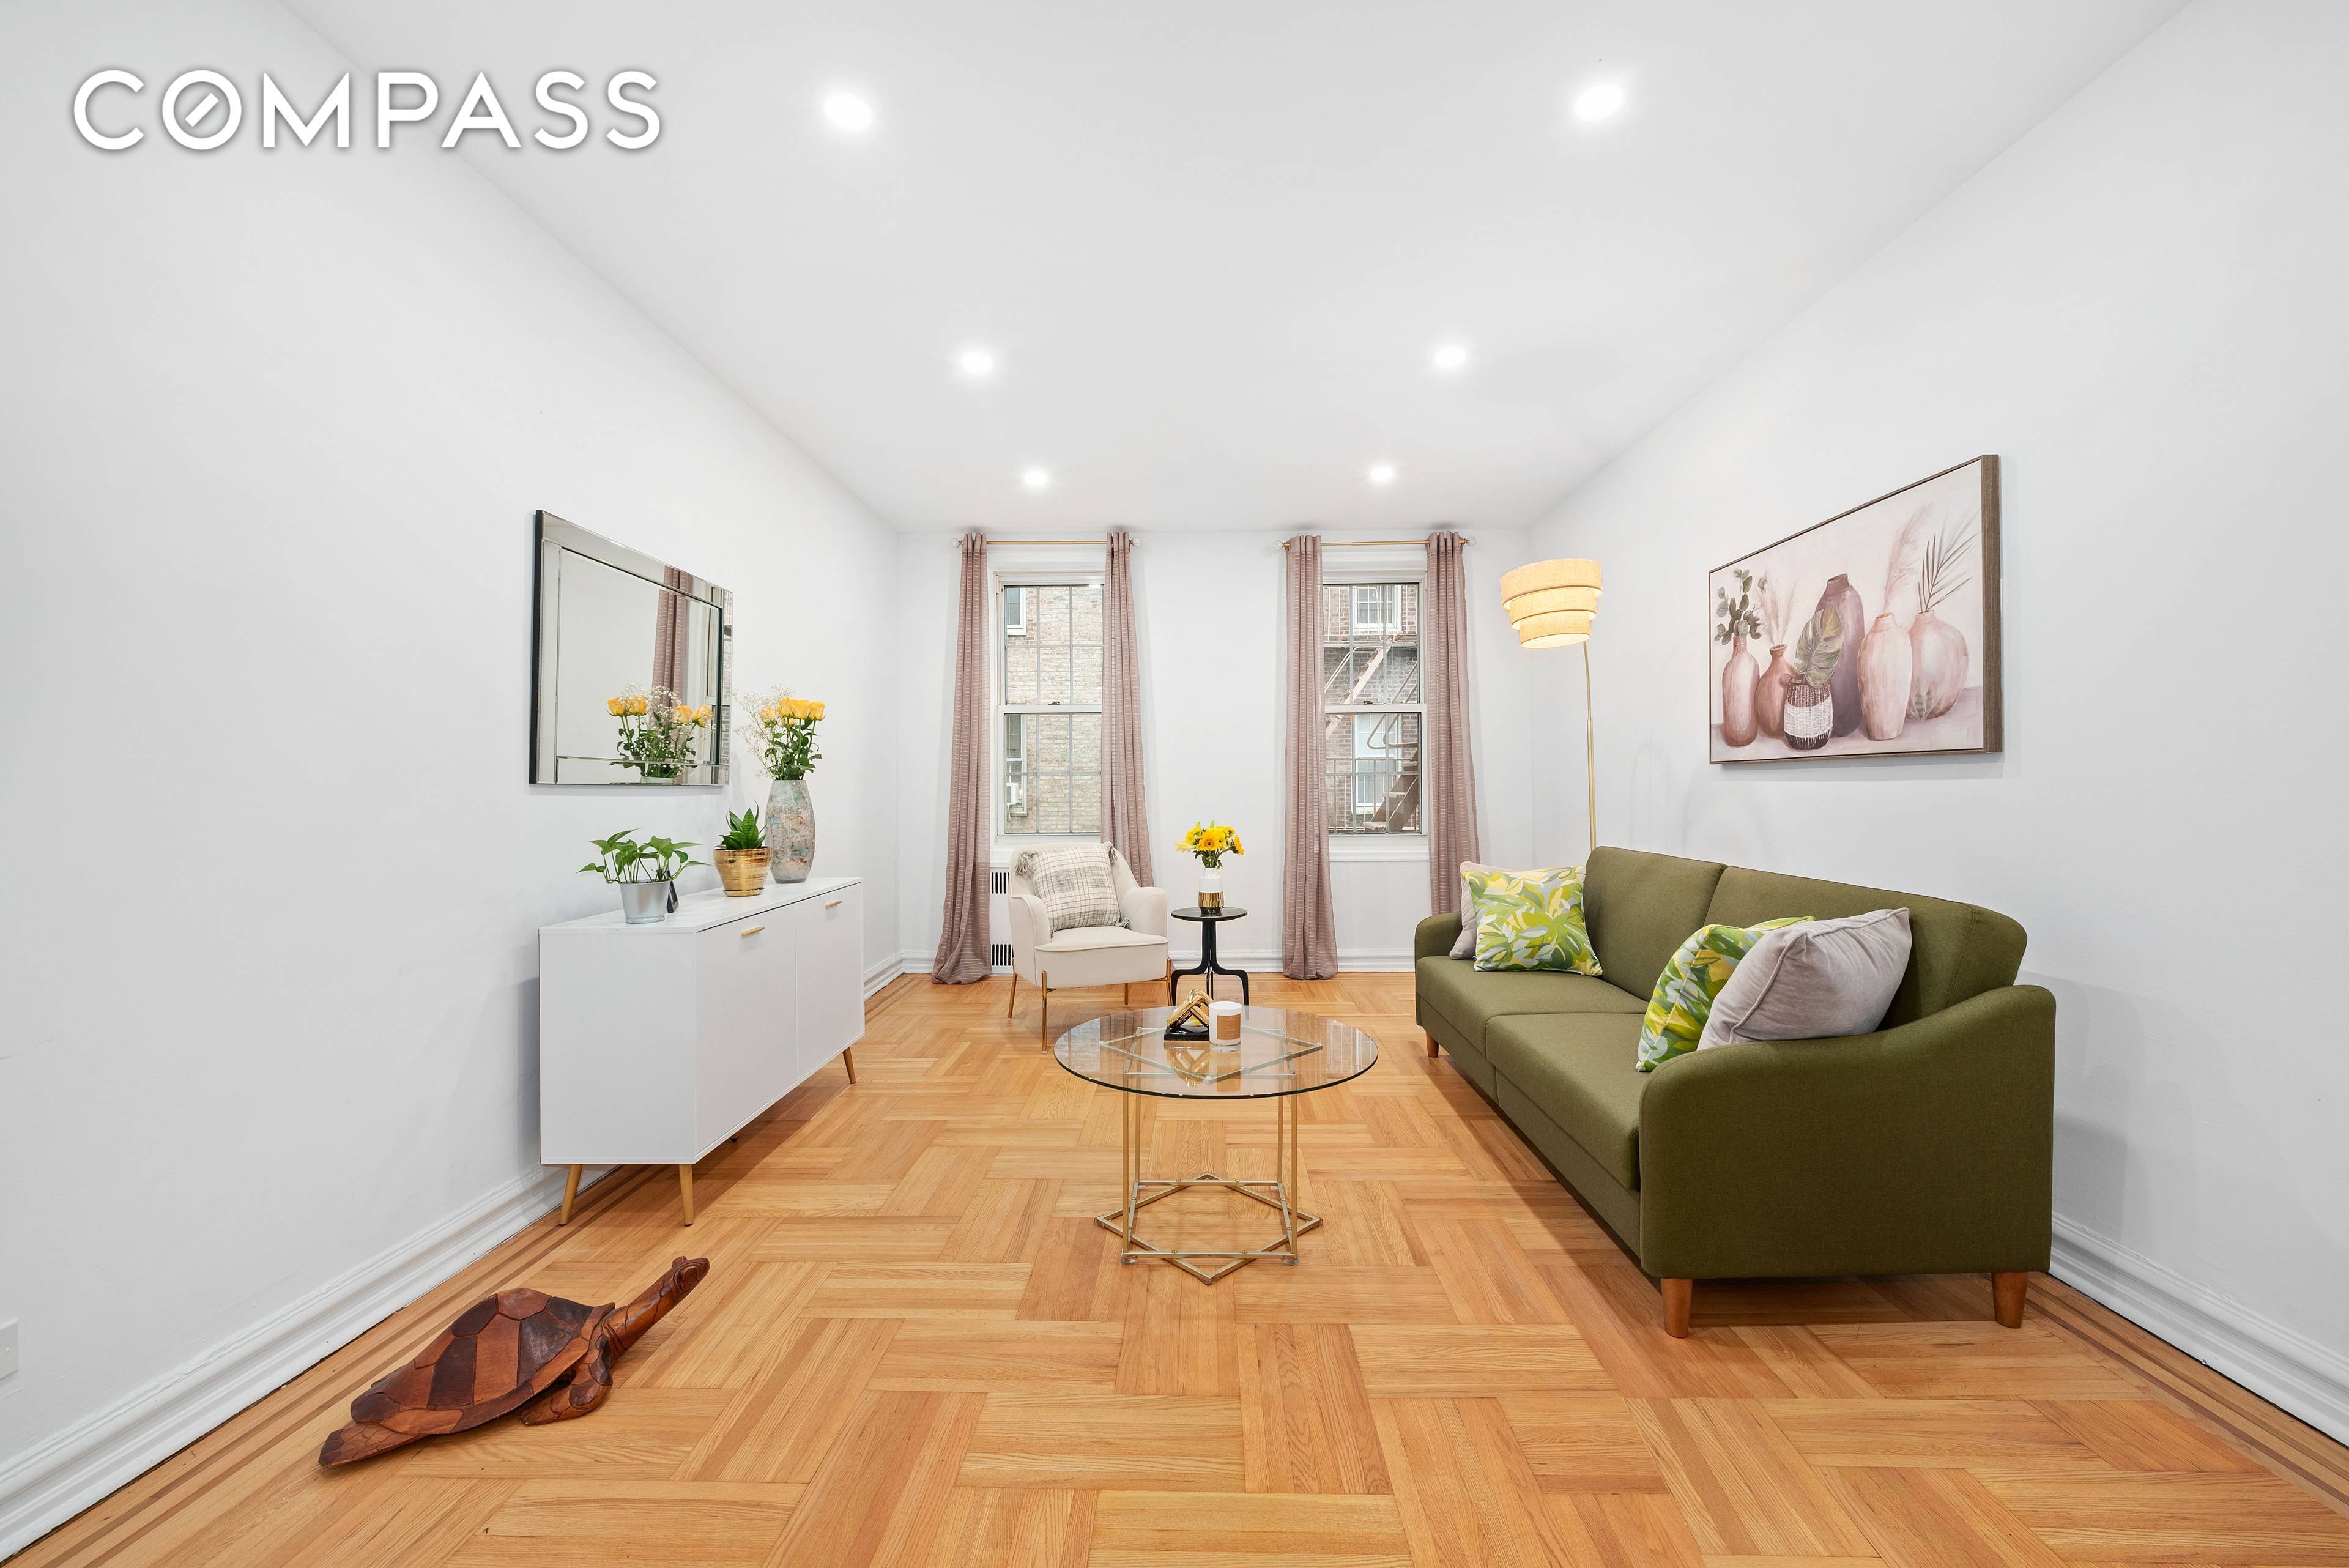 This incredible newly renovated coop features one bedroom and one bathroom, and it is ideally situated in the vibrant neighborhood of Clinton Hill.